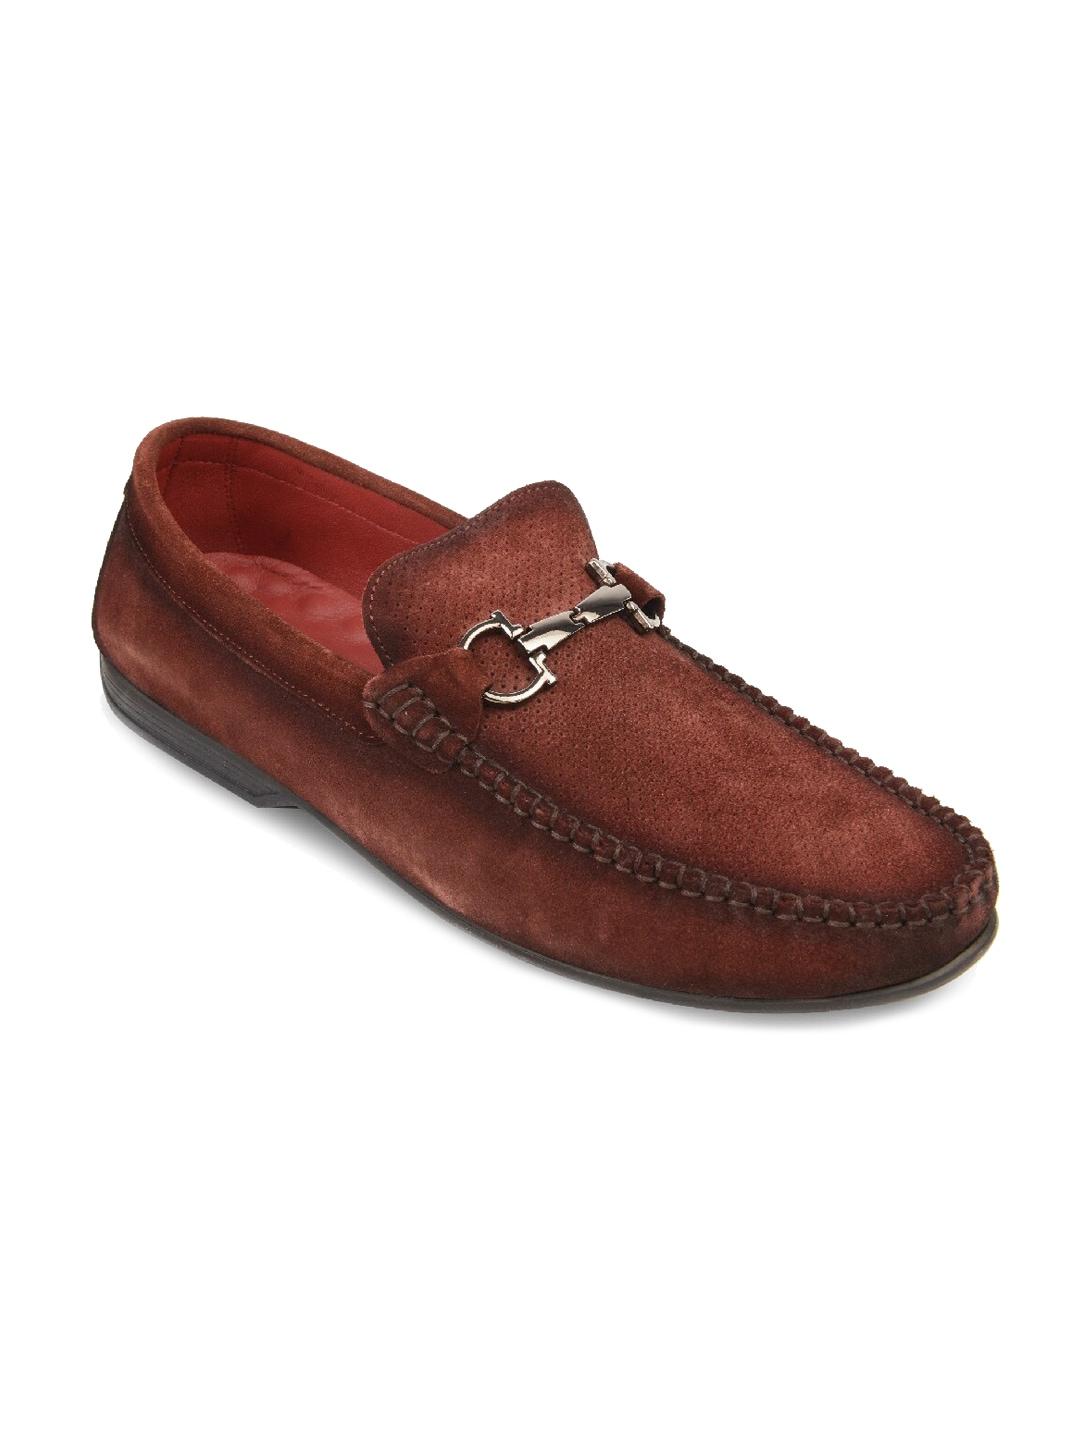 Regal Men Maroon Textured Leather Loafers